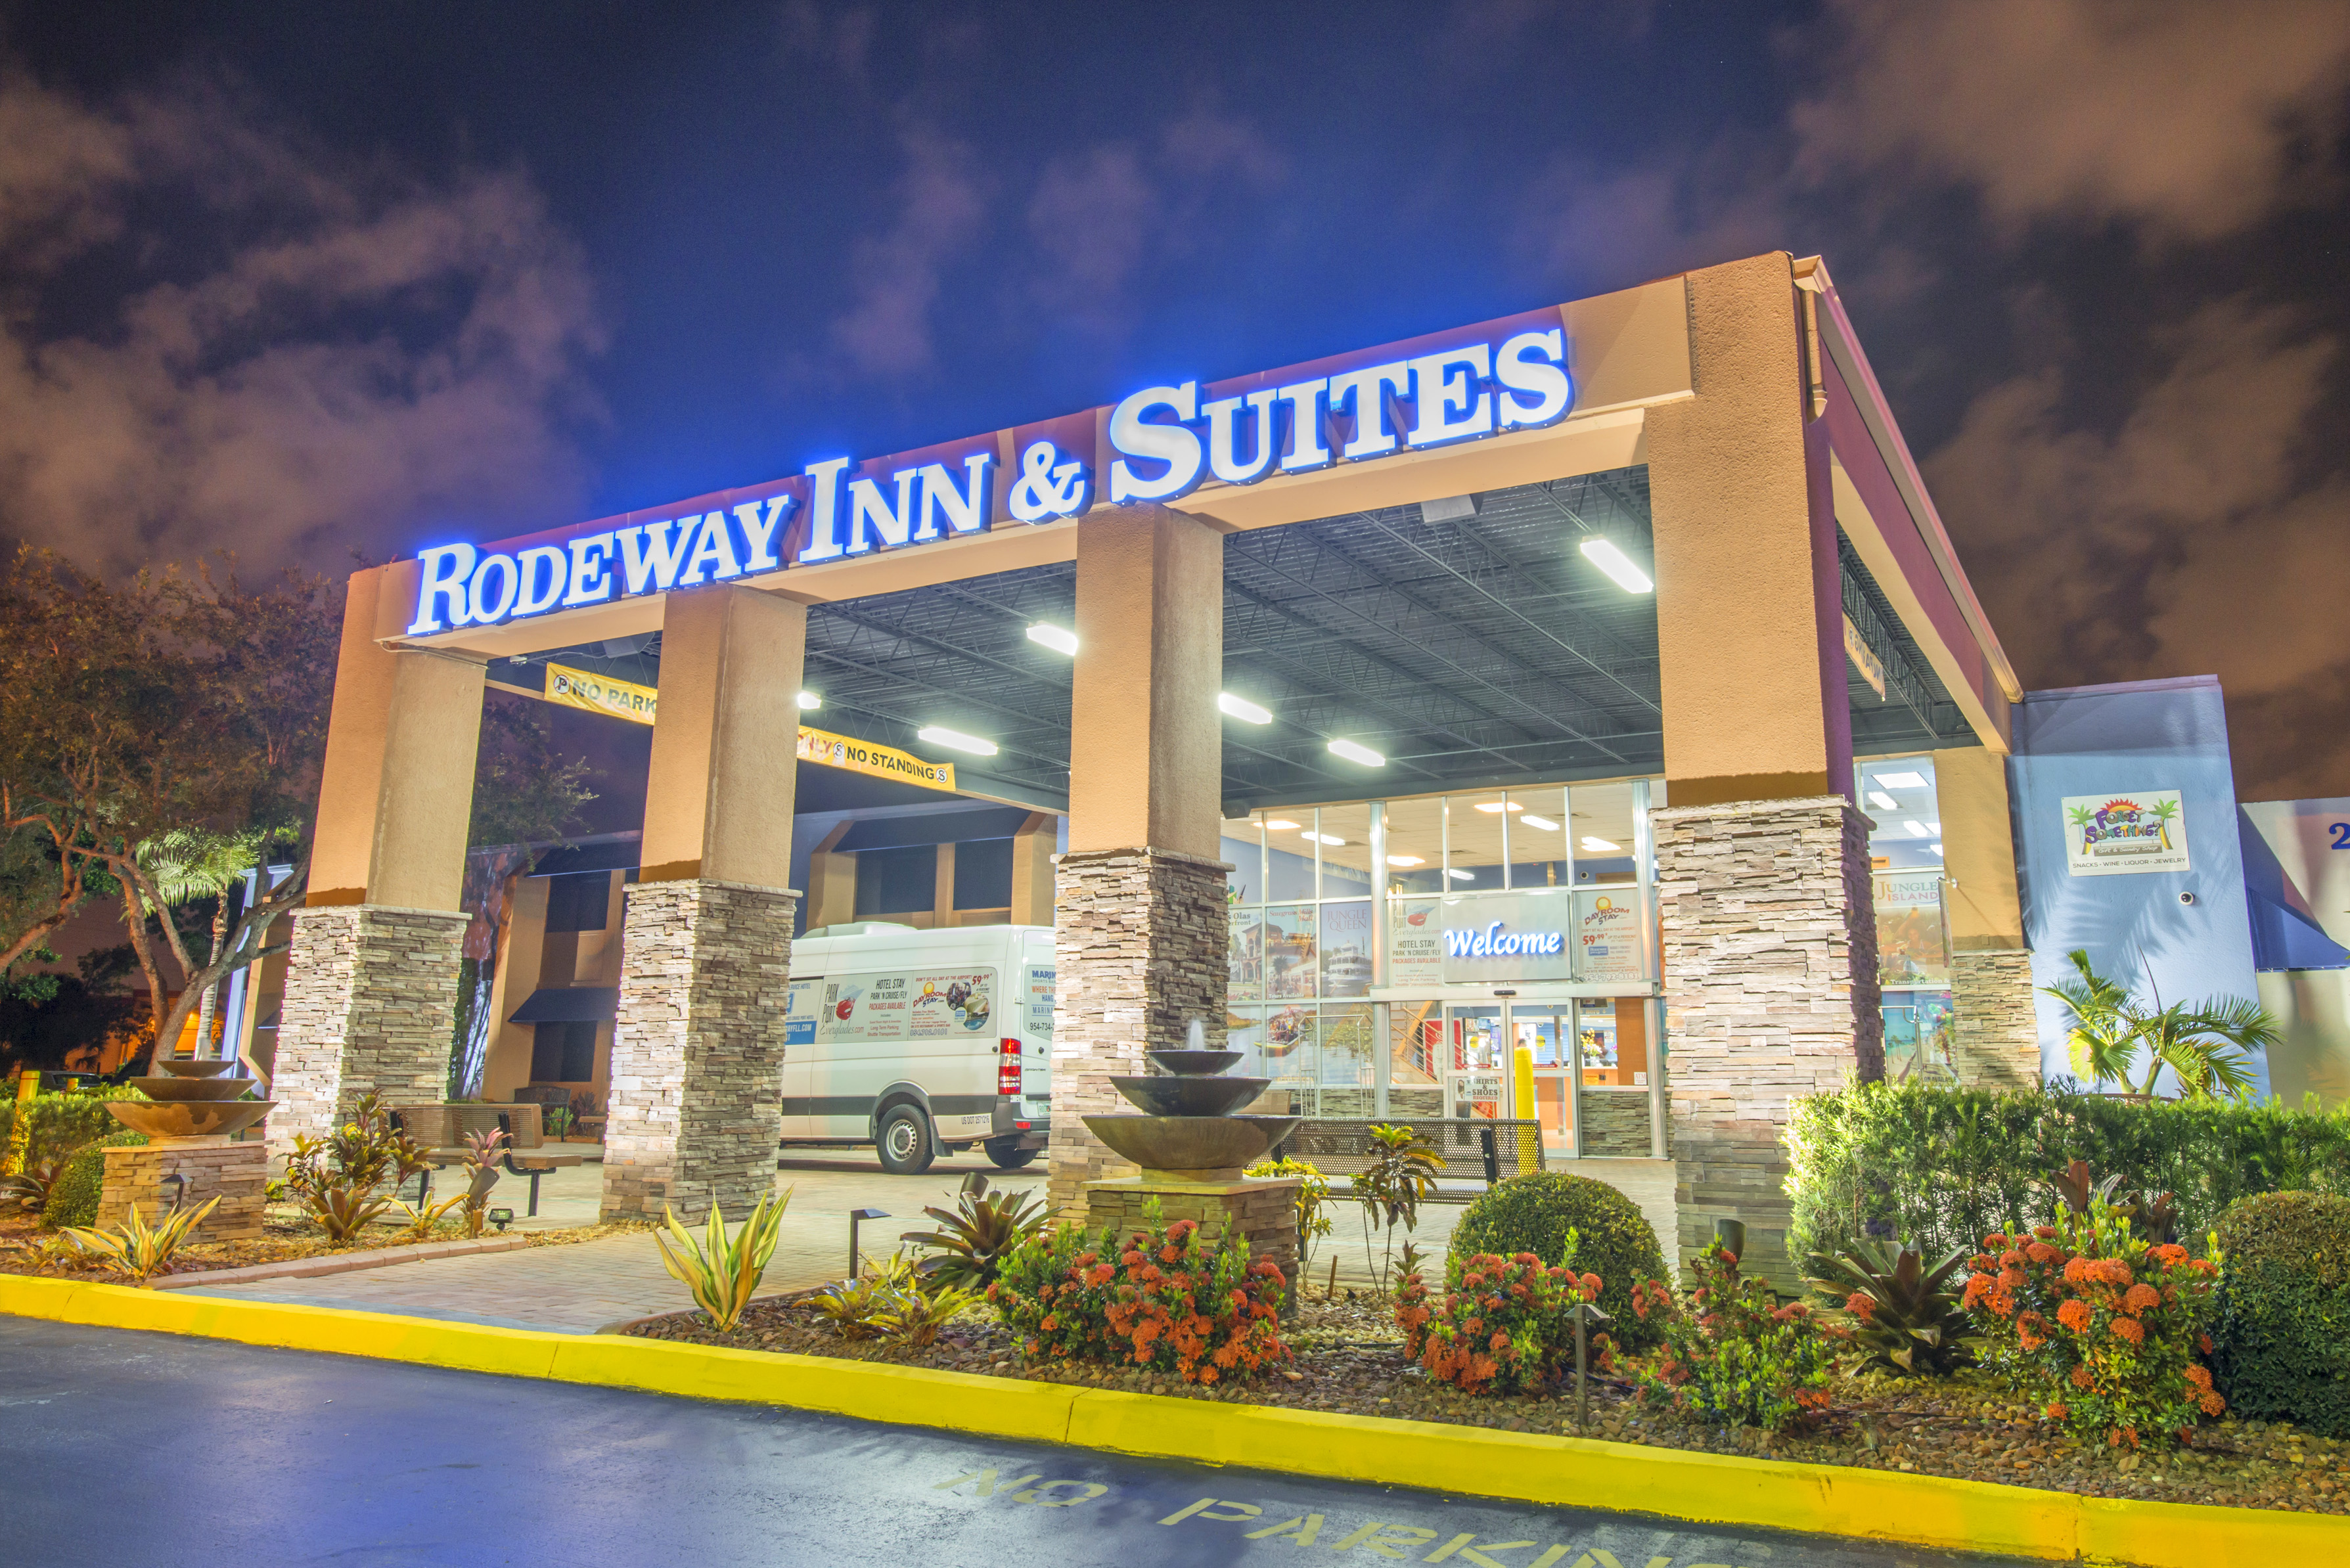 Rodeway Inn & Suites - Fort Lauderdale Airport & Port Everglades Cruise Port Hotel Ready for Arrival of MS Koningsdam